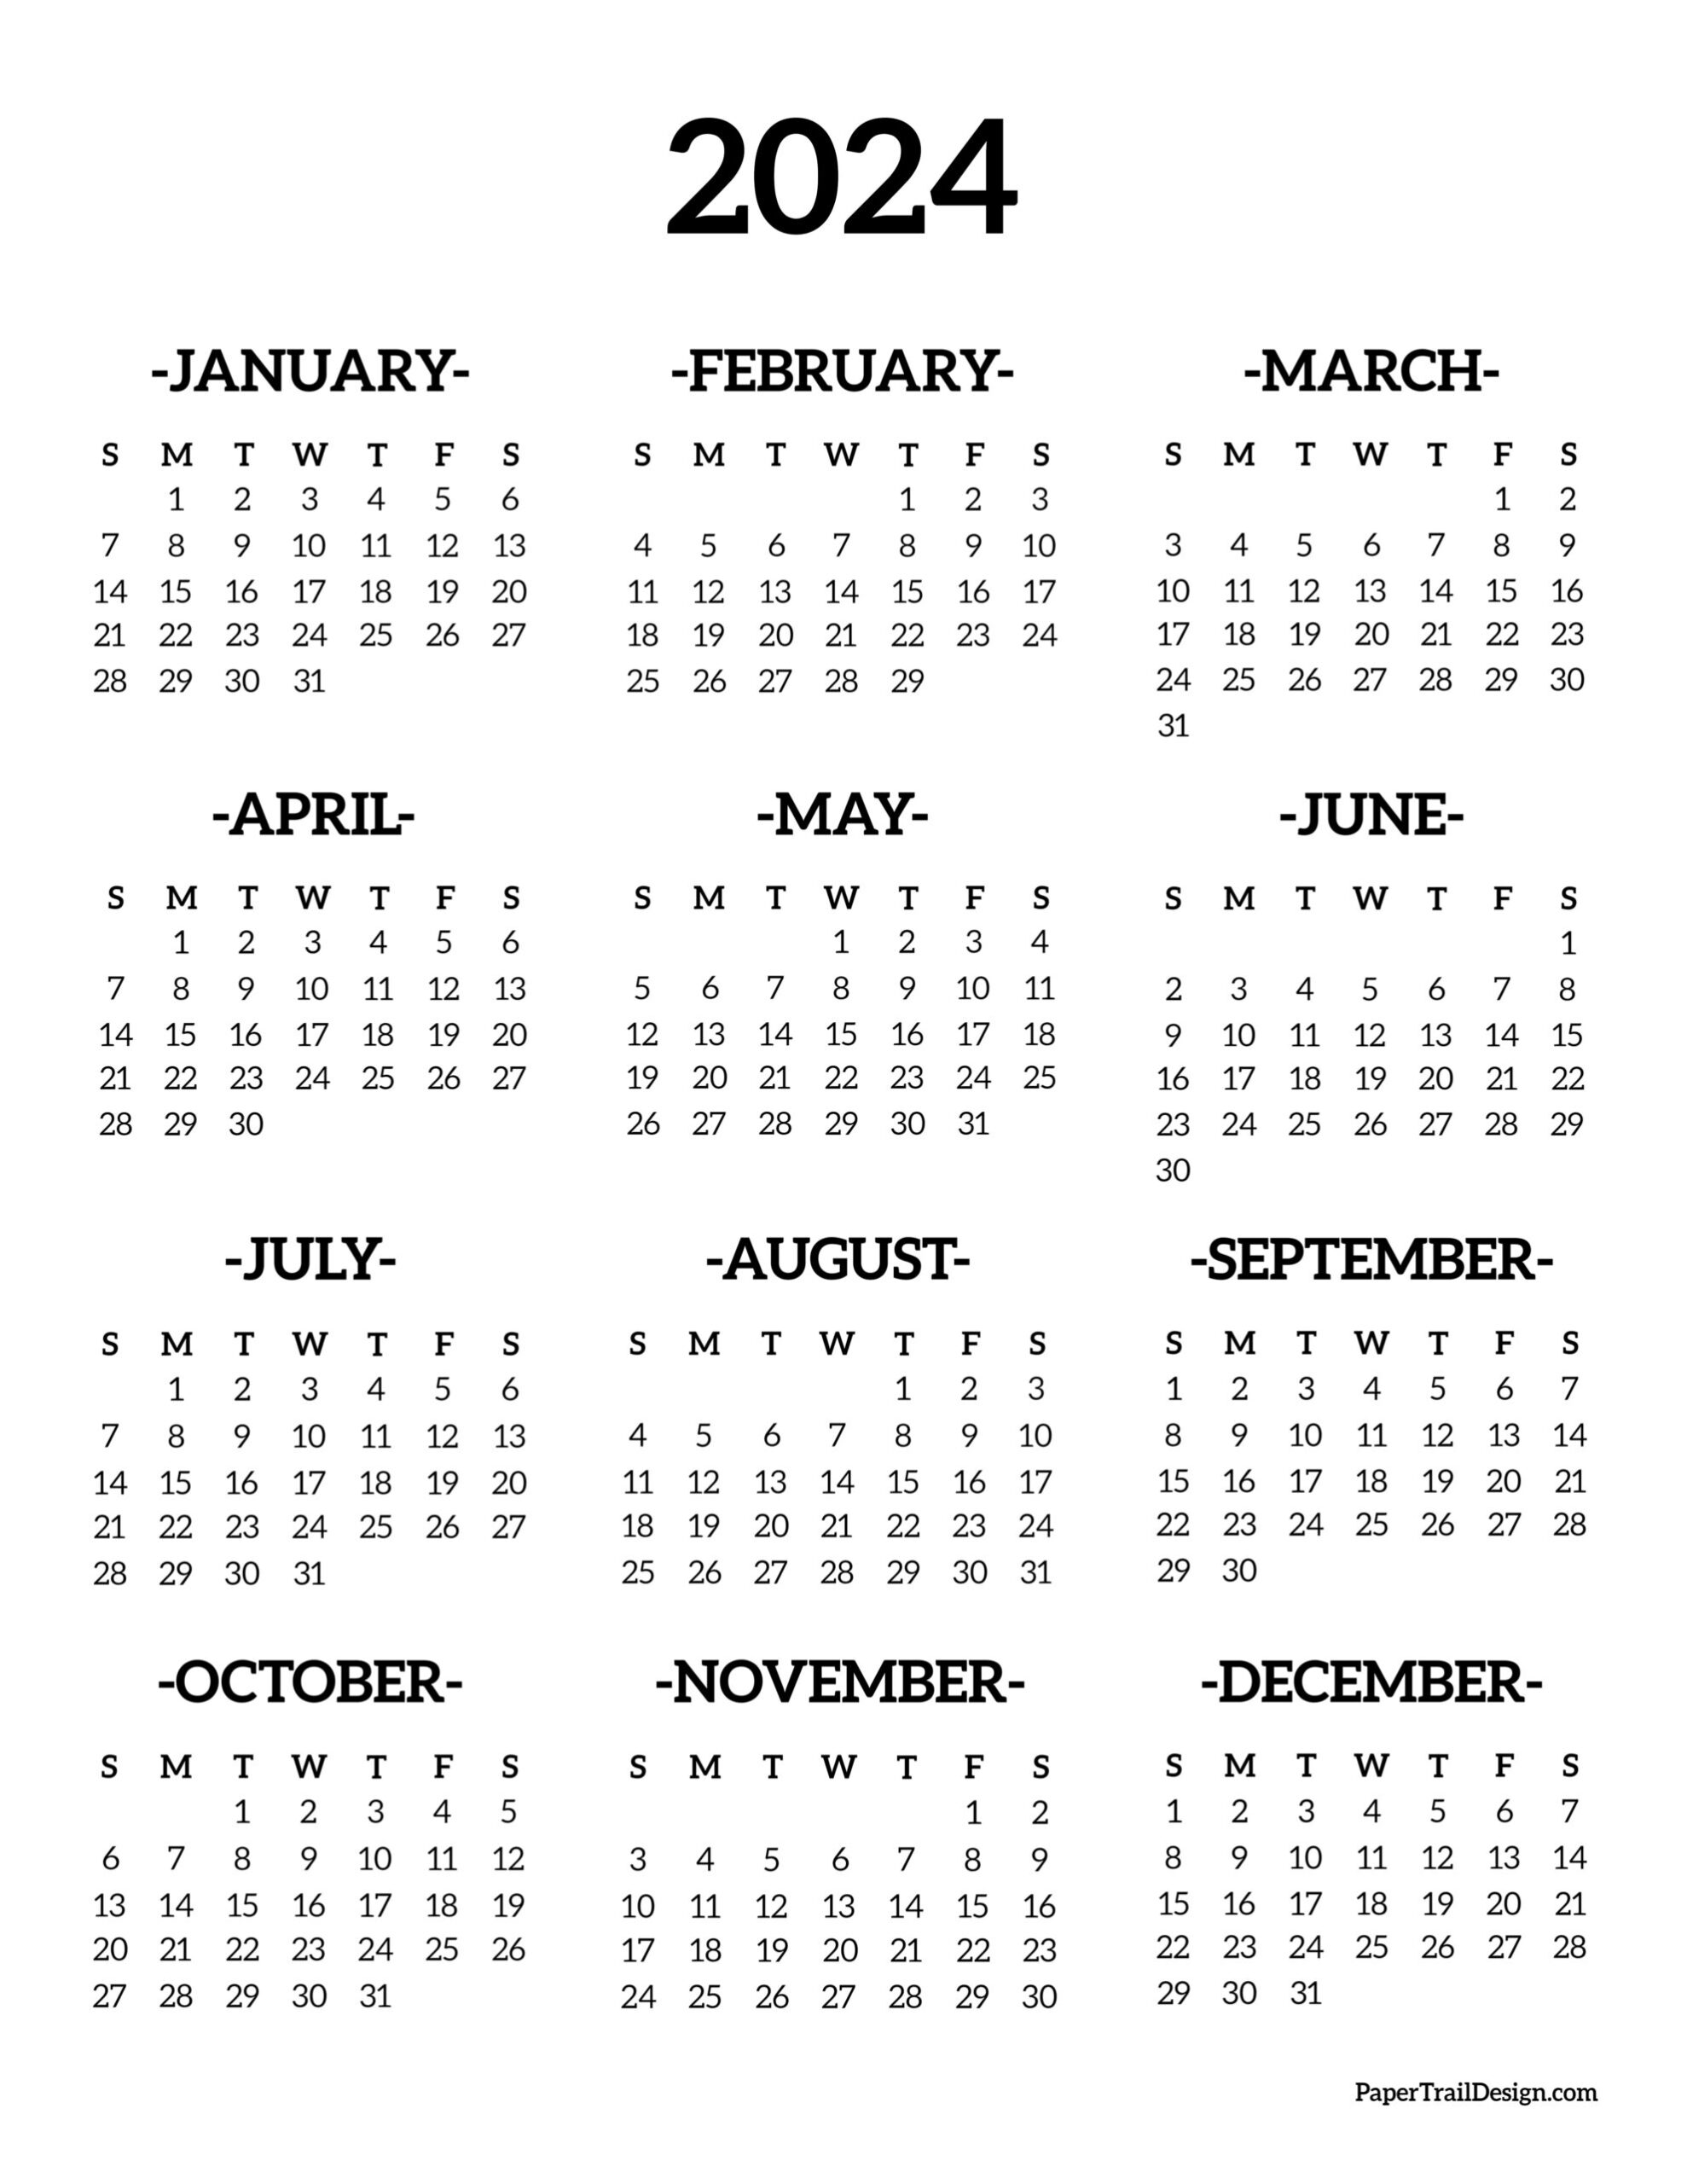 Calendar 2024 Printable One Page - Paper Trail Design for Free Printable 2024 Year At A Glance Calendar